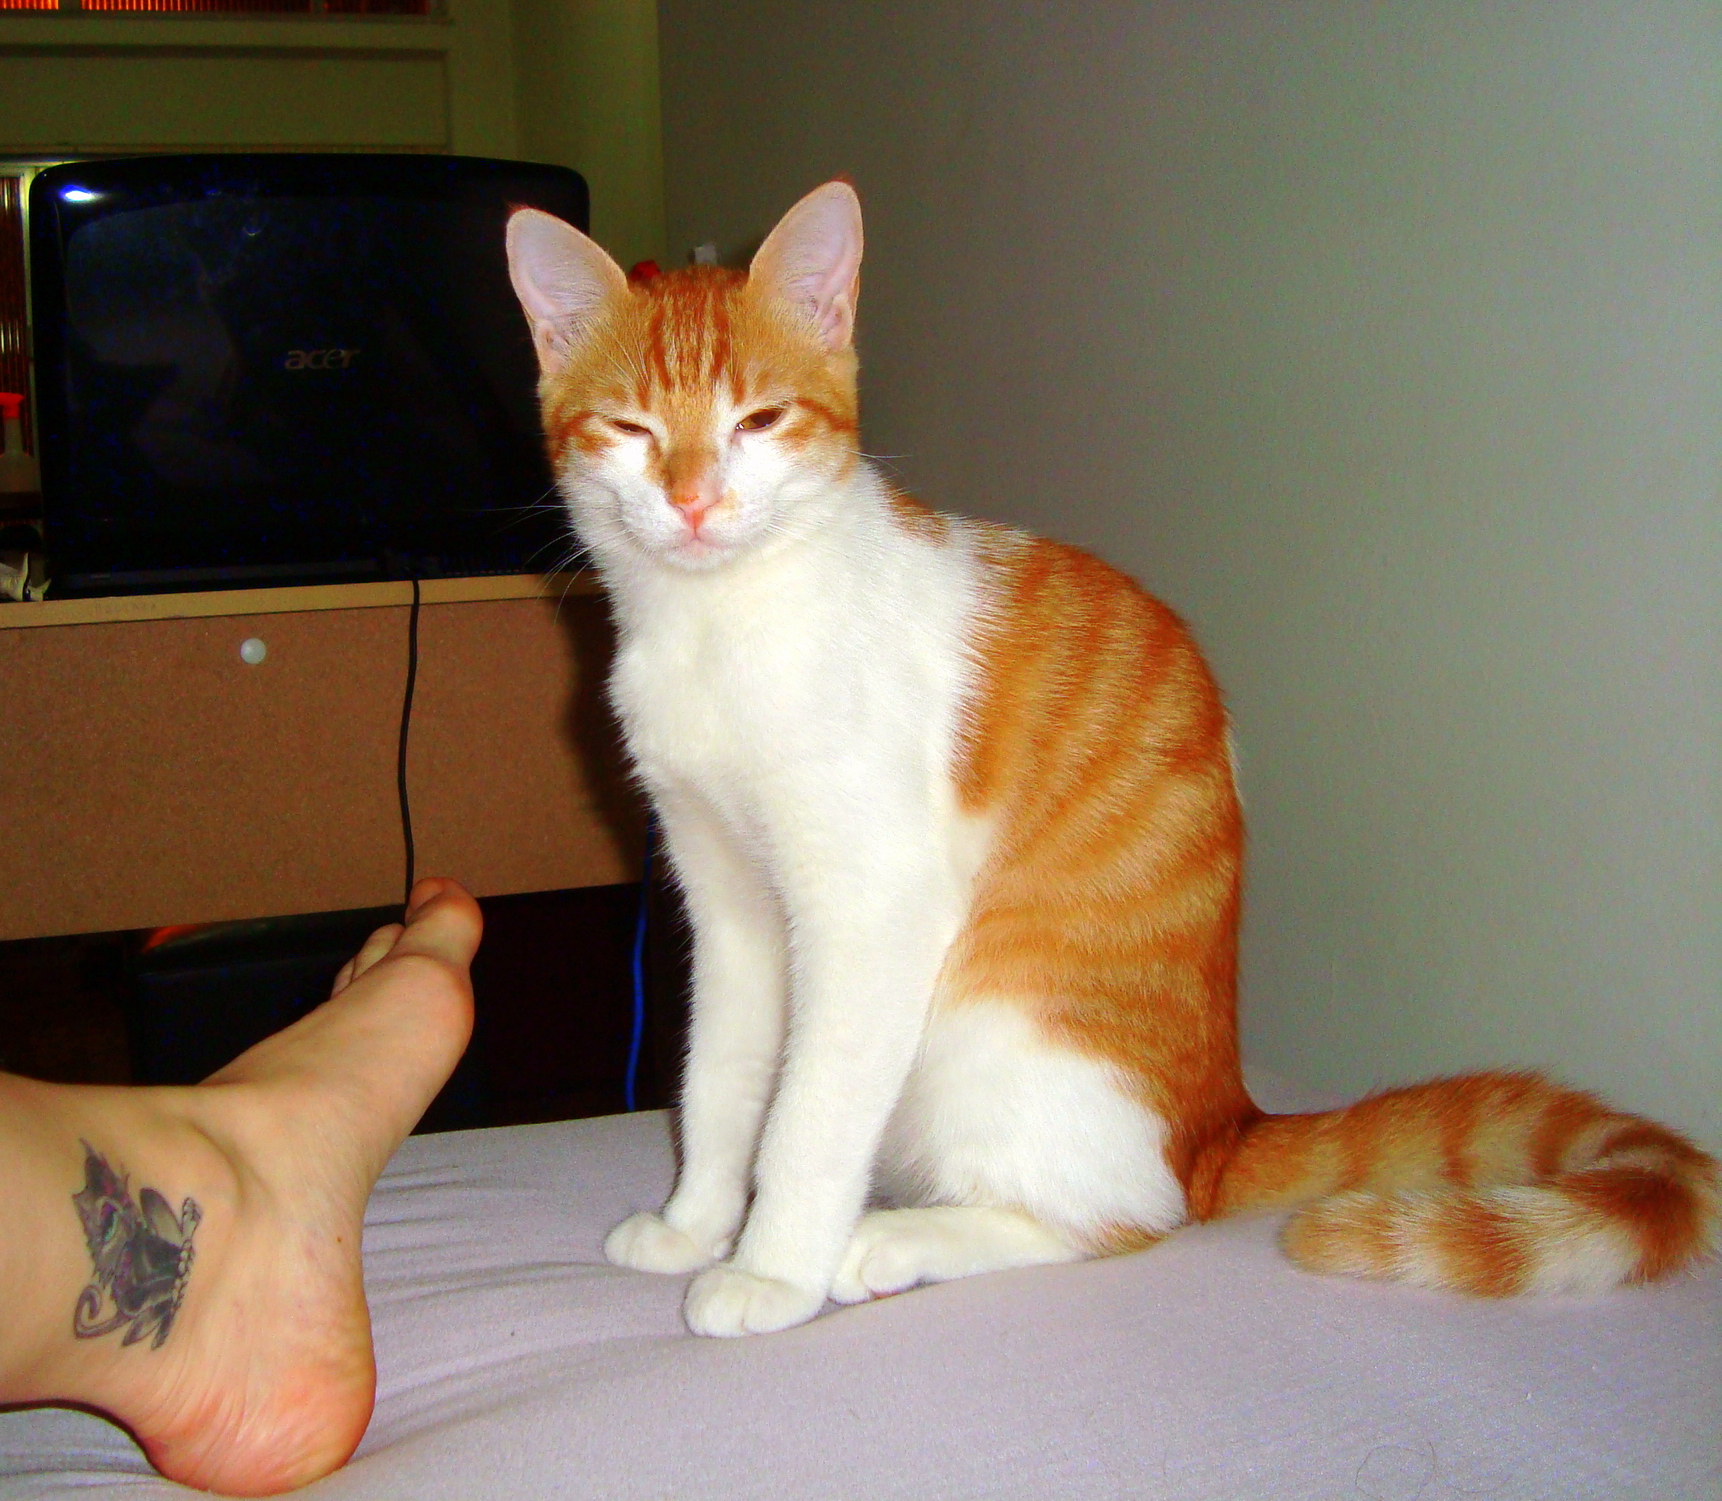 an orange and white cat sitting next to a person's feet